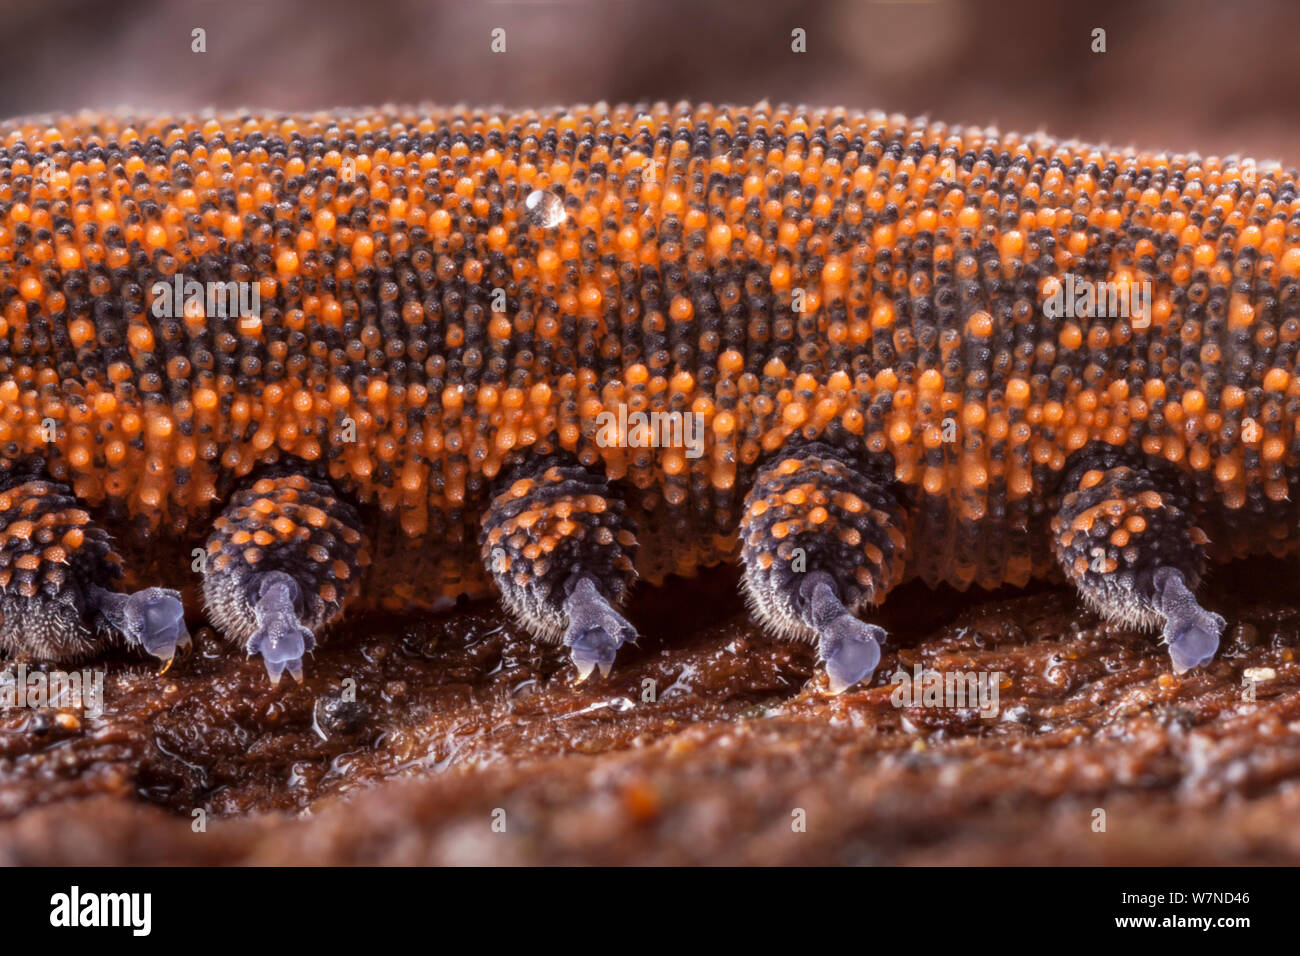 Velvet Worm feet (Peripatus novaezealandiae). Velvet Worms are known as 'living fossils', having remained the same for approximately 570 million years. Captive from New Zealand Stock Photo